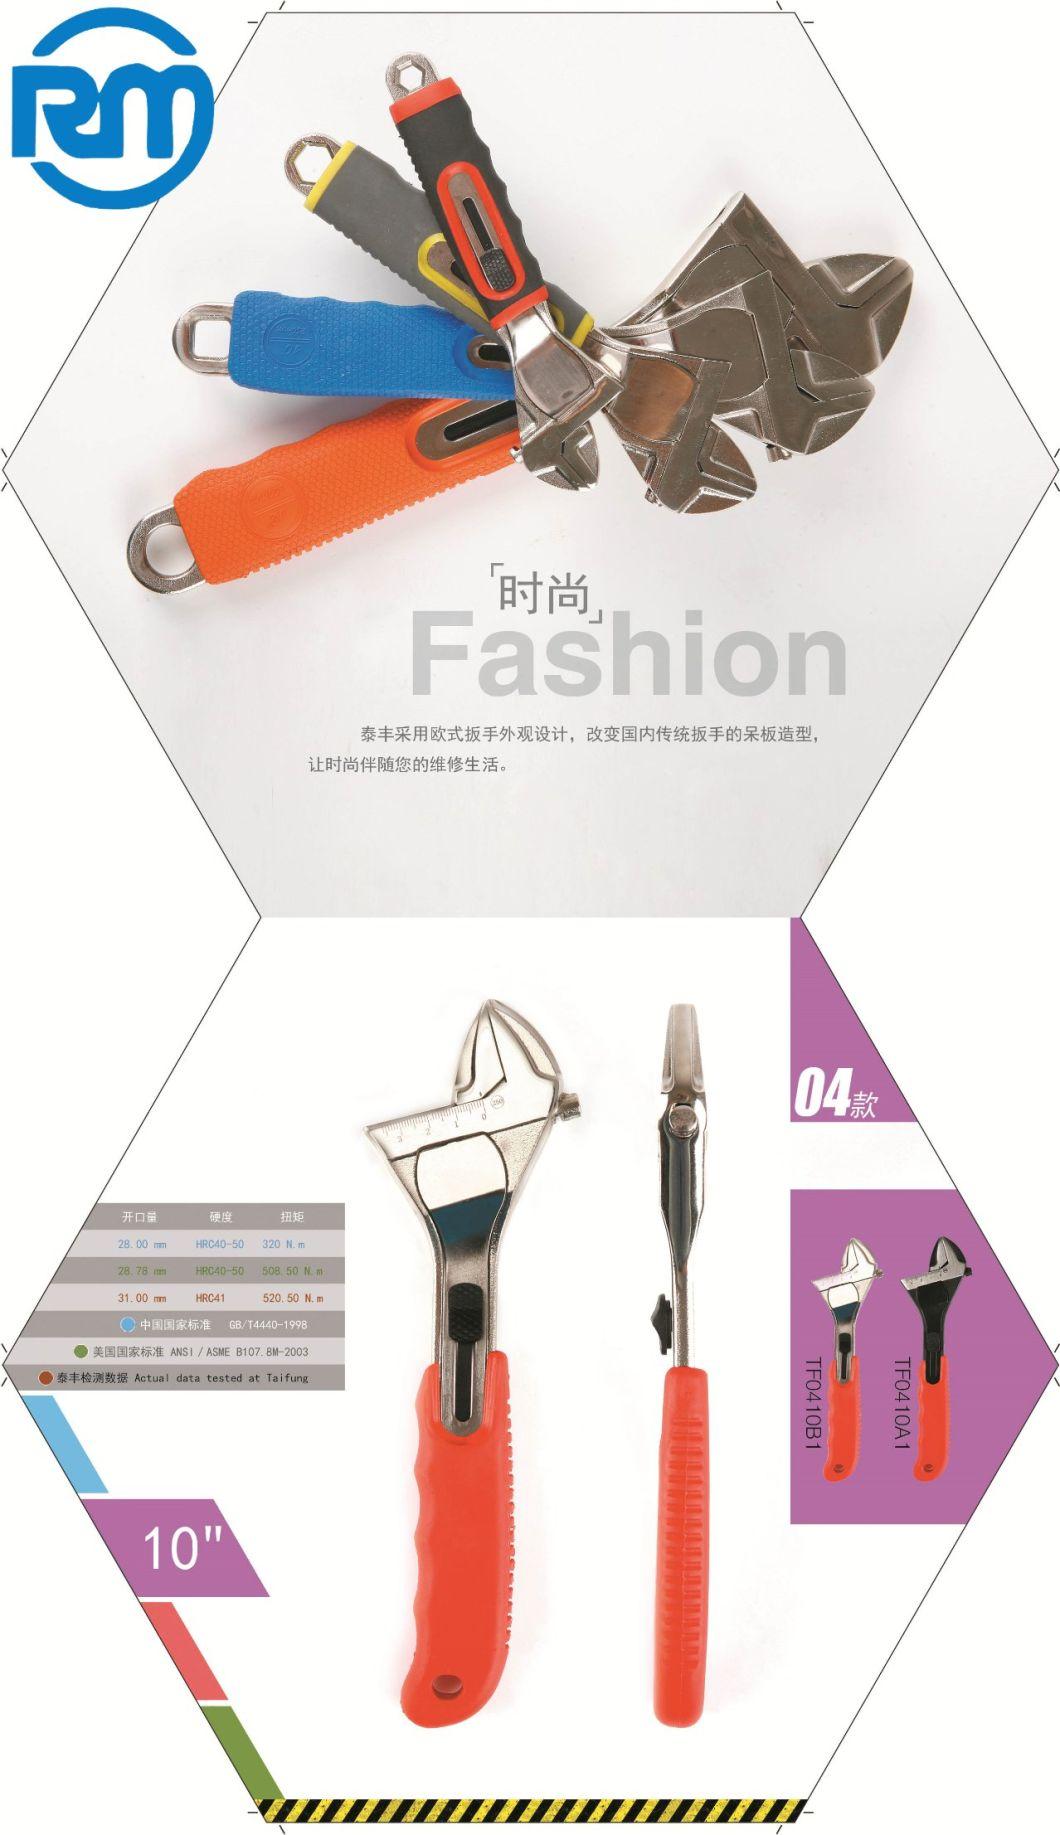 Standards Nickel Plating Surface Wrench Sliding Adjustment System Nickel Plating Surface Strictly Controlled Blackening